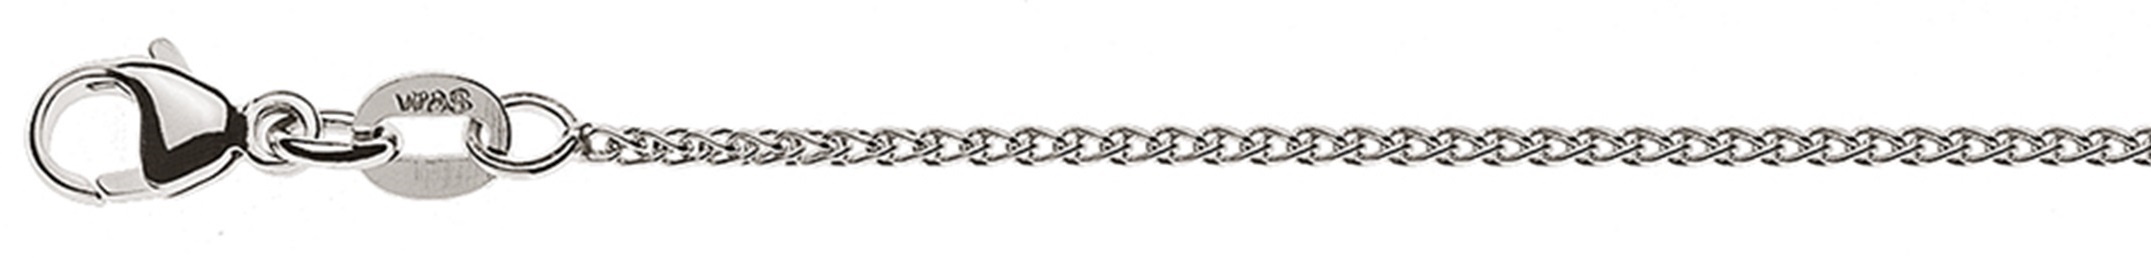 AURONOS Style Necklace white gold 9K cable chain 60cm 1.2mm